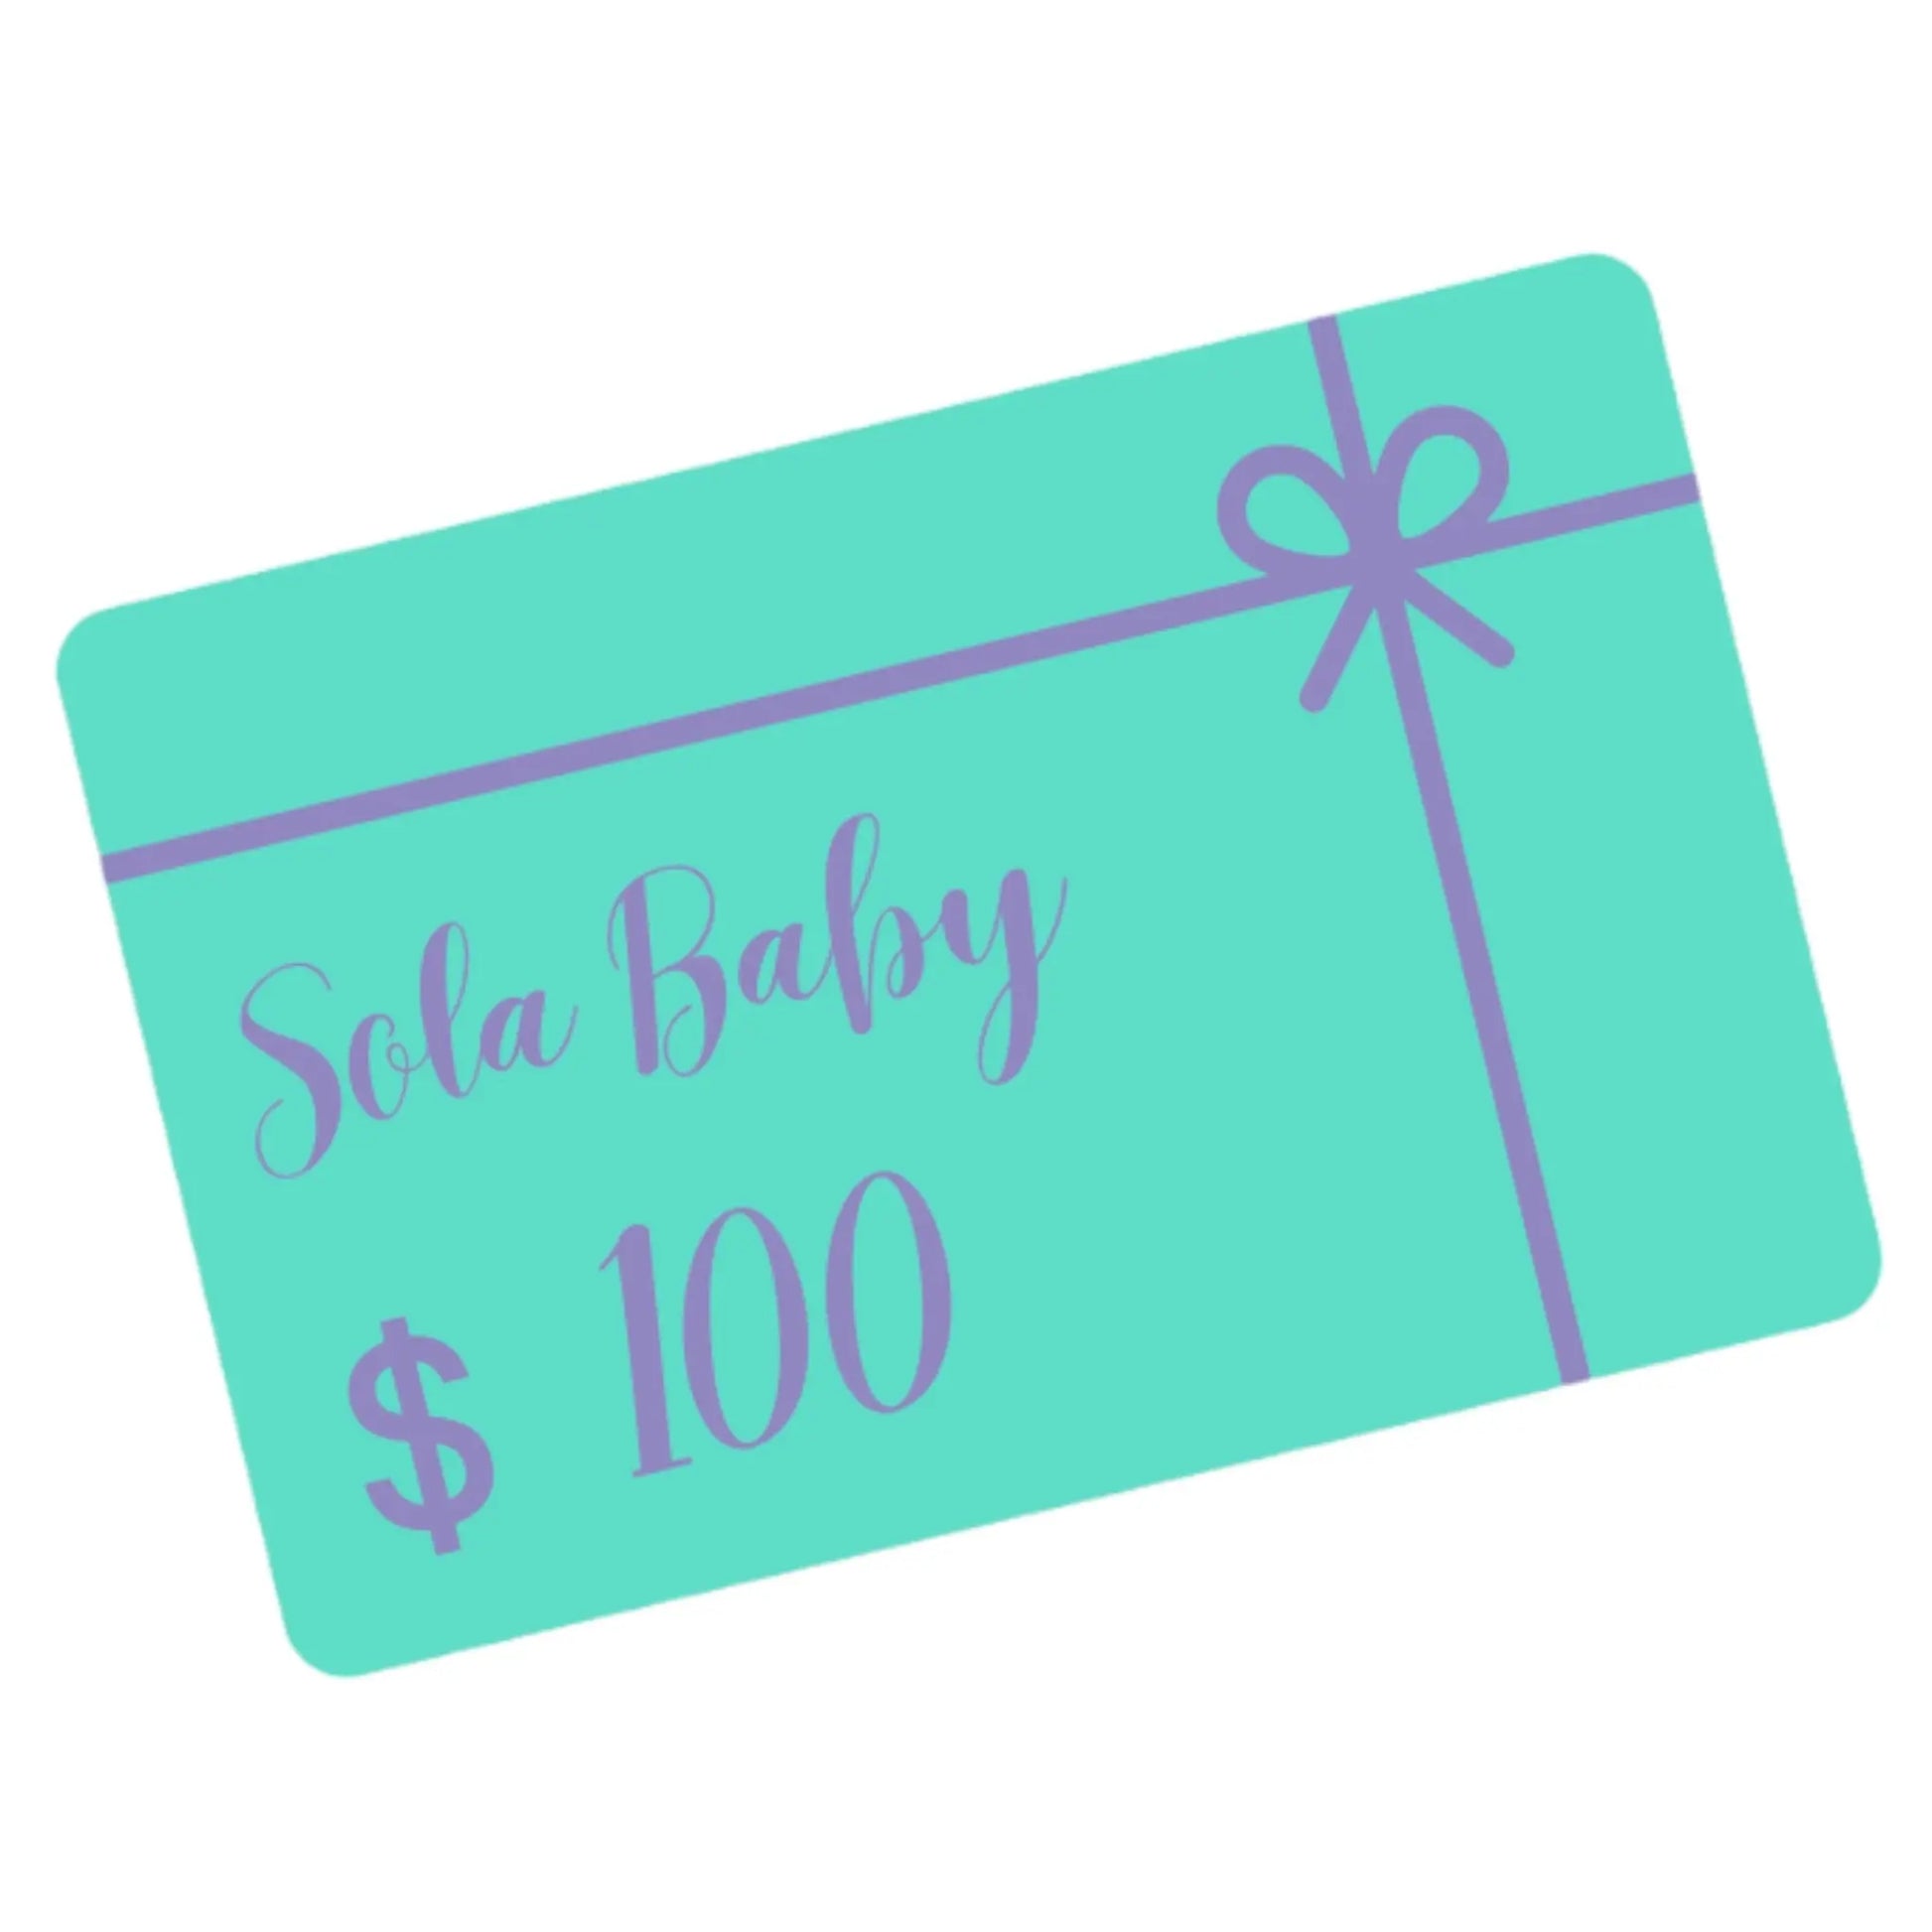 Gift card - Sola Baby Boutique